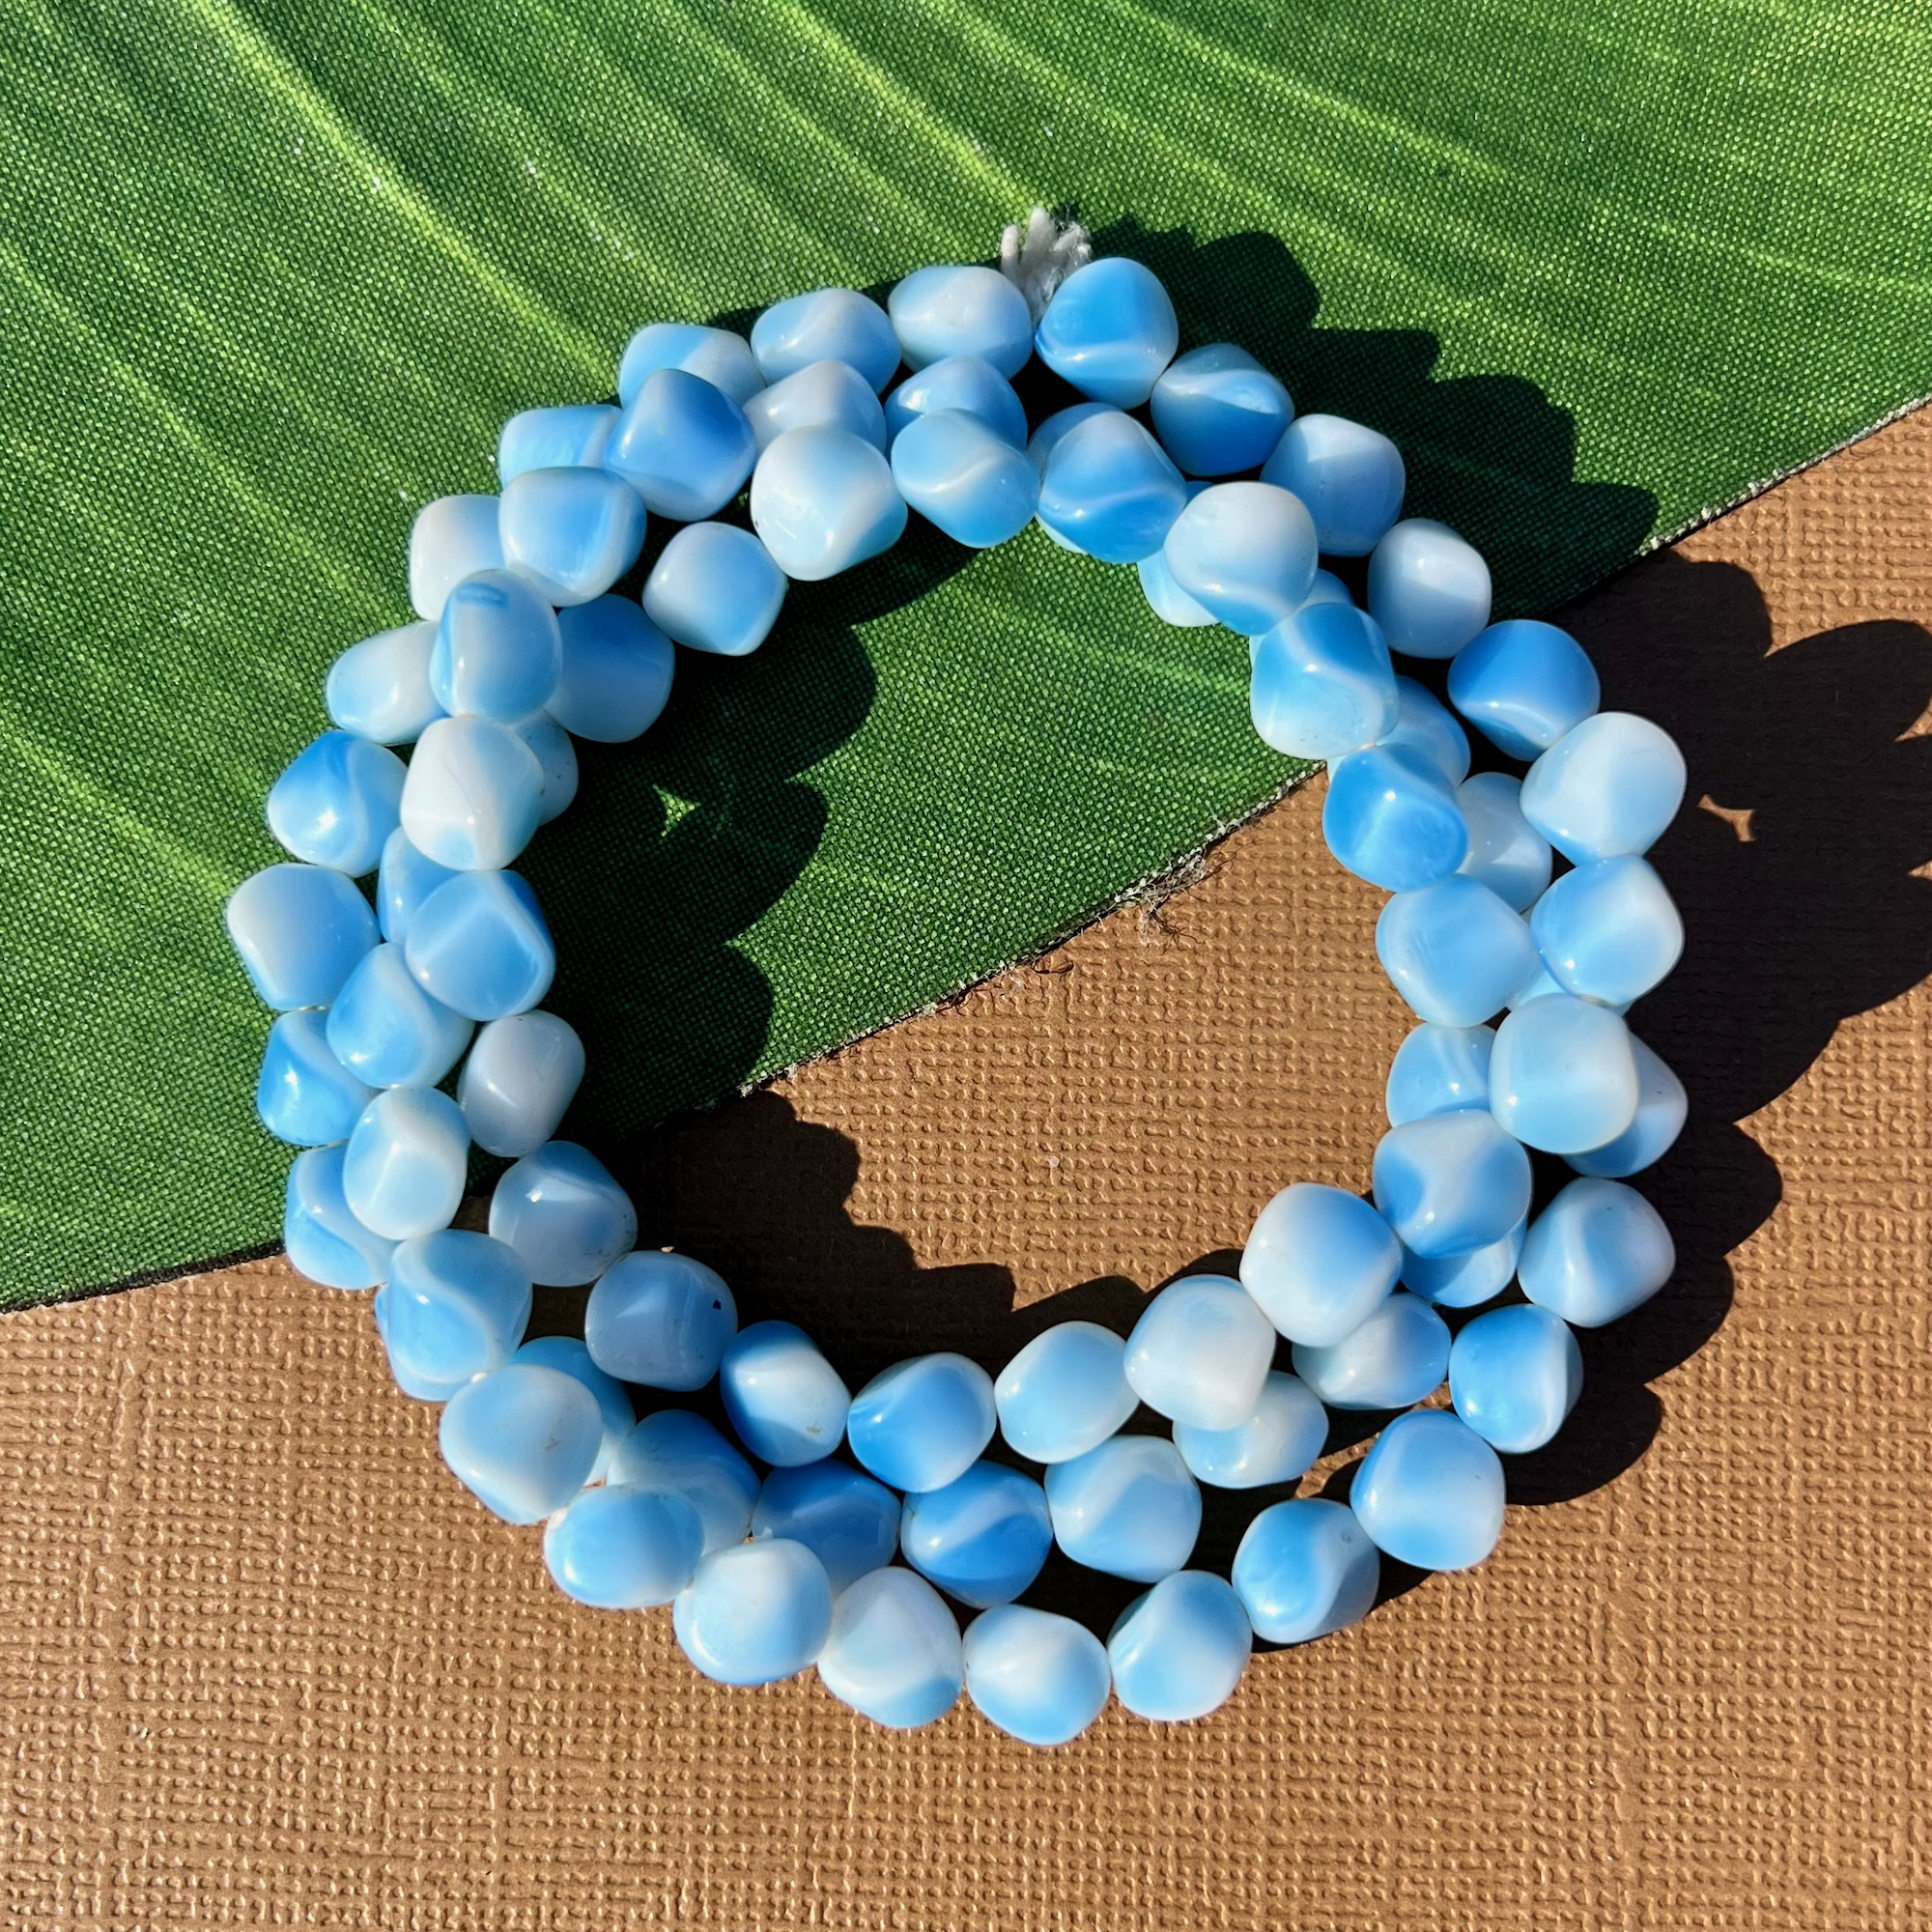 Light Blue Organic 3 Sided Beads - 75 Pieces